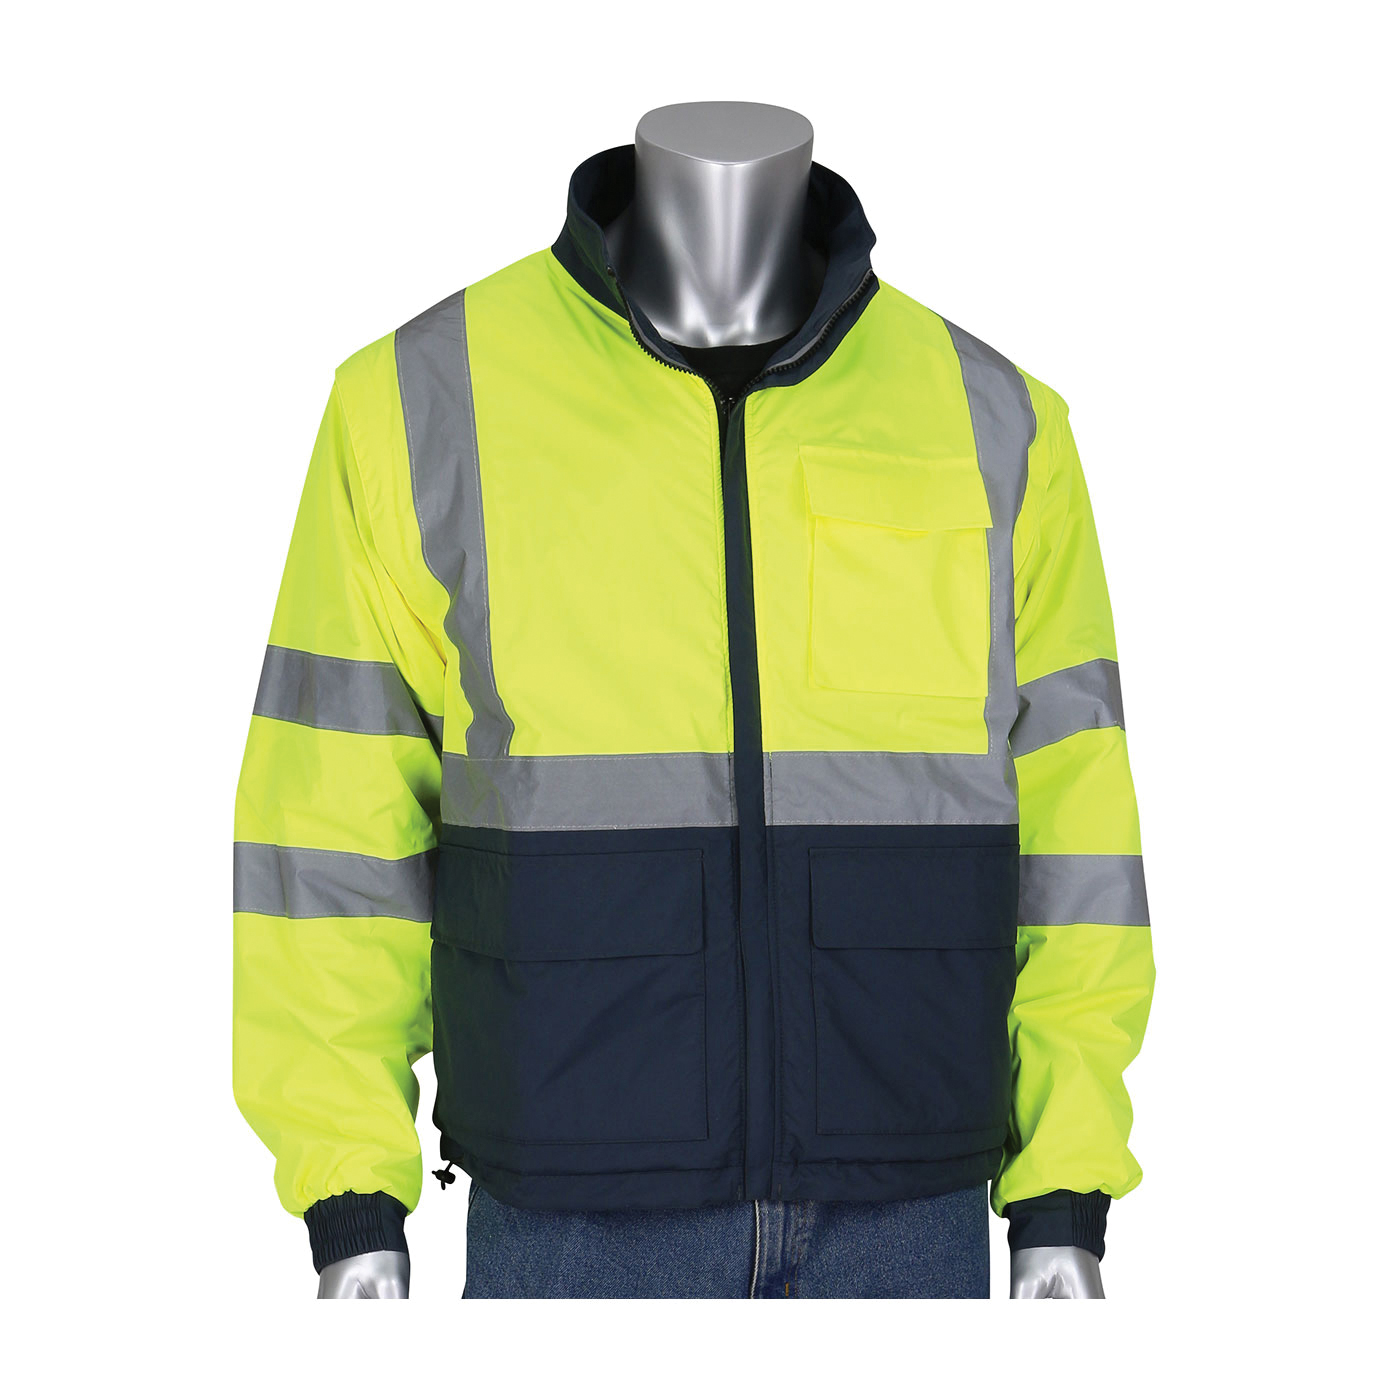 PIP® 333-1500-R/5X 333-1500-R 4-in-1 Multi-Seasonal Lightweight Reversible Windbreaker Jacket With Detachable Sleeves, Dark Gray/Hi-Viz Lime Yellow, Polyester, 63 in Chest, Resists: Water, ANSI 107 Type R Class 3